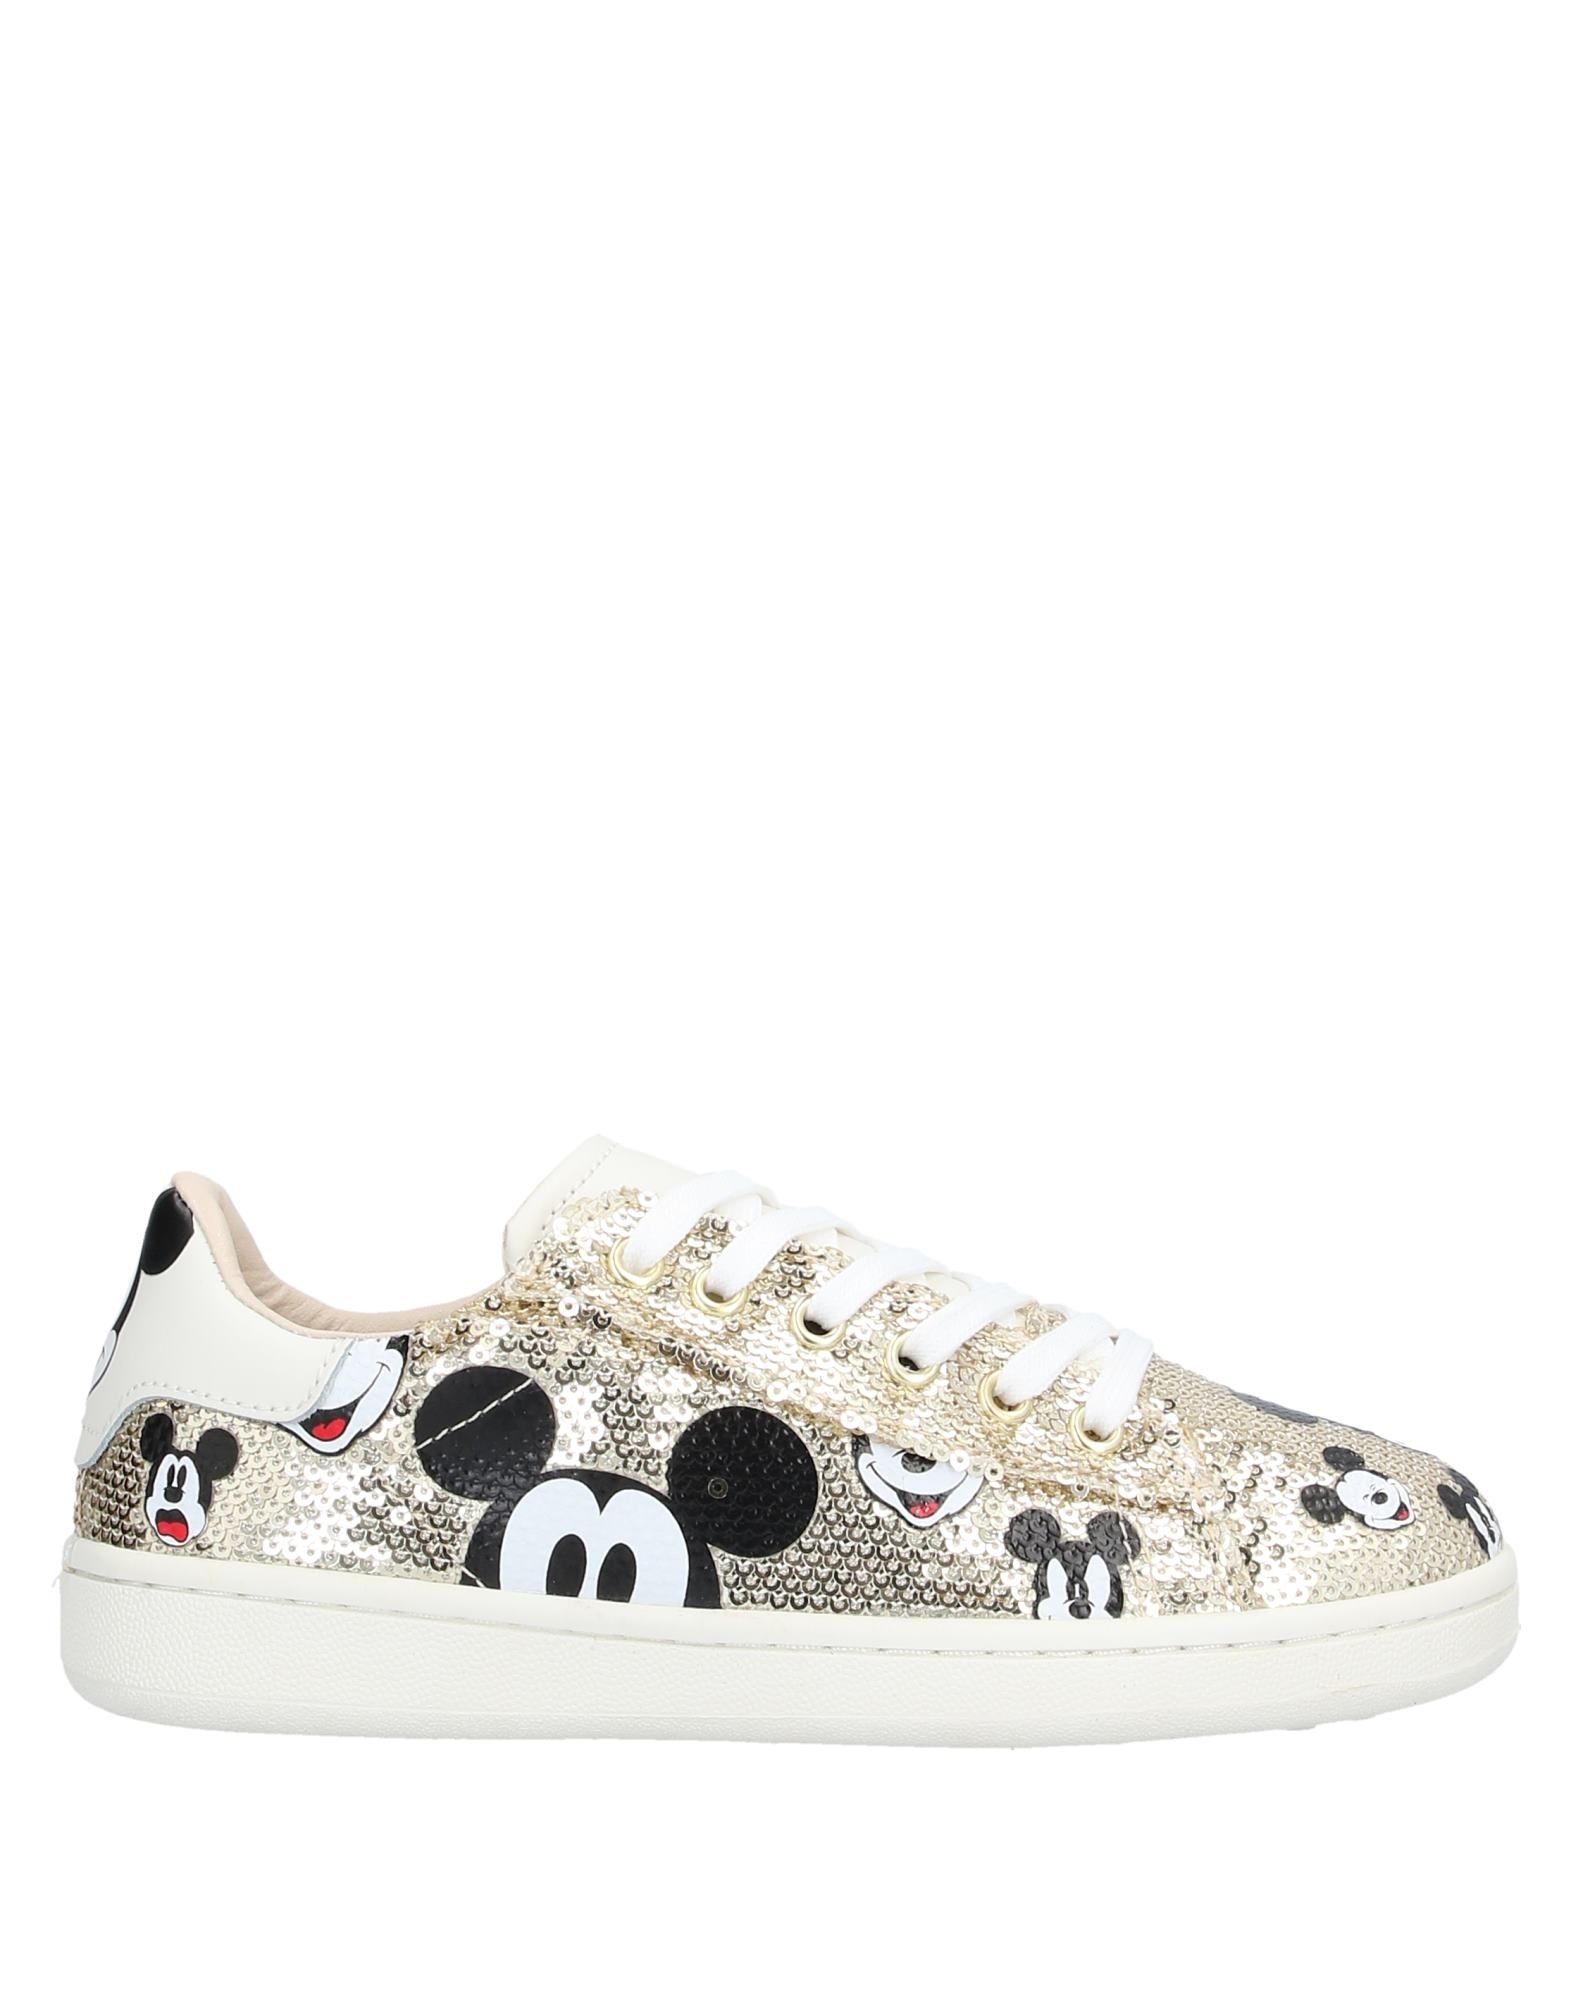 MOACONCEPT Sneakers Kinder Gold von MOACONCEPT